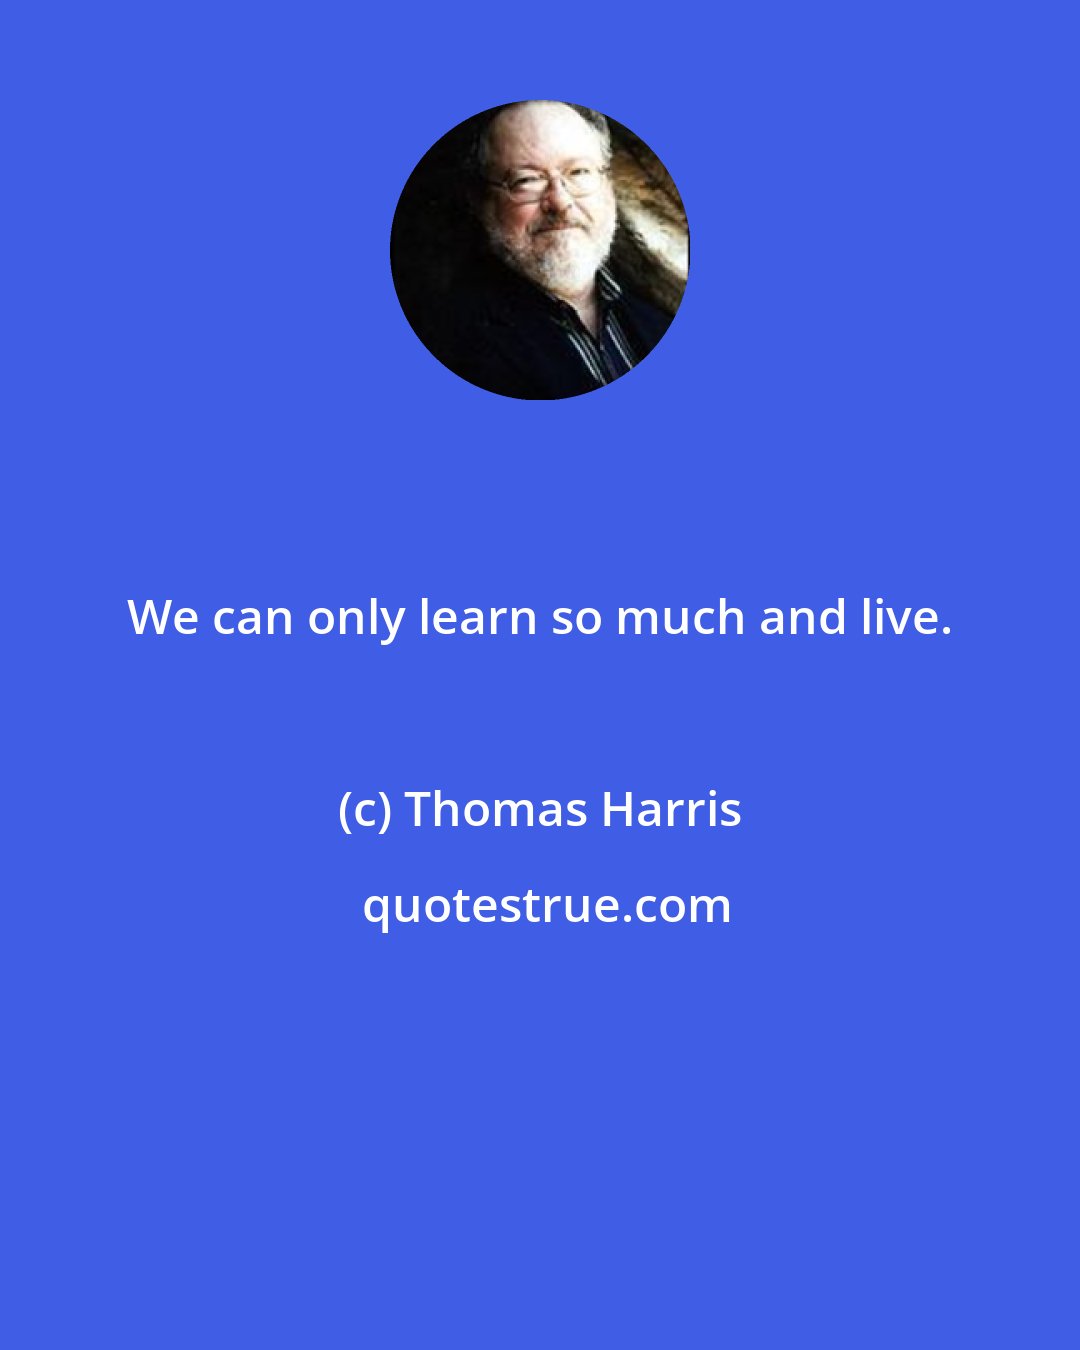 Thomas Harris: We can only learn so much and live.